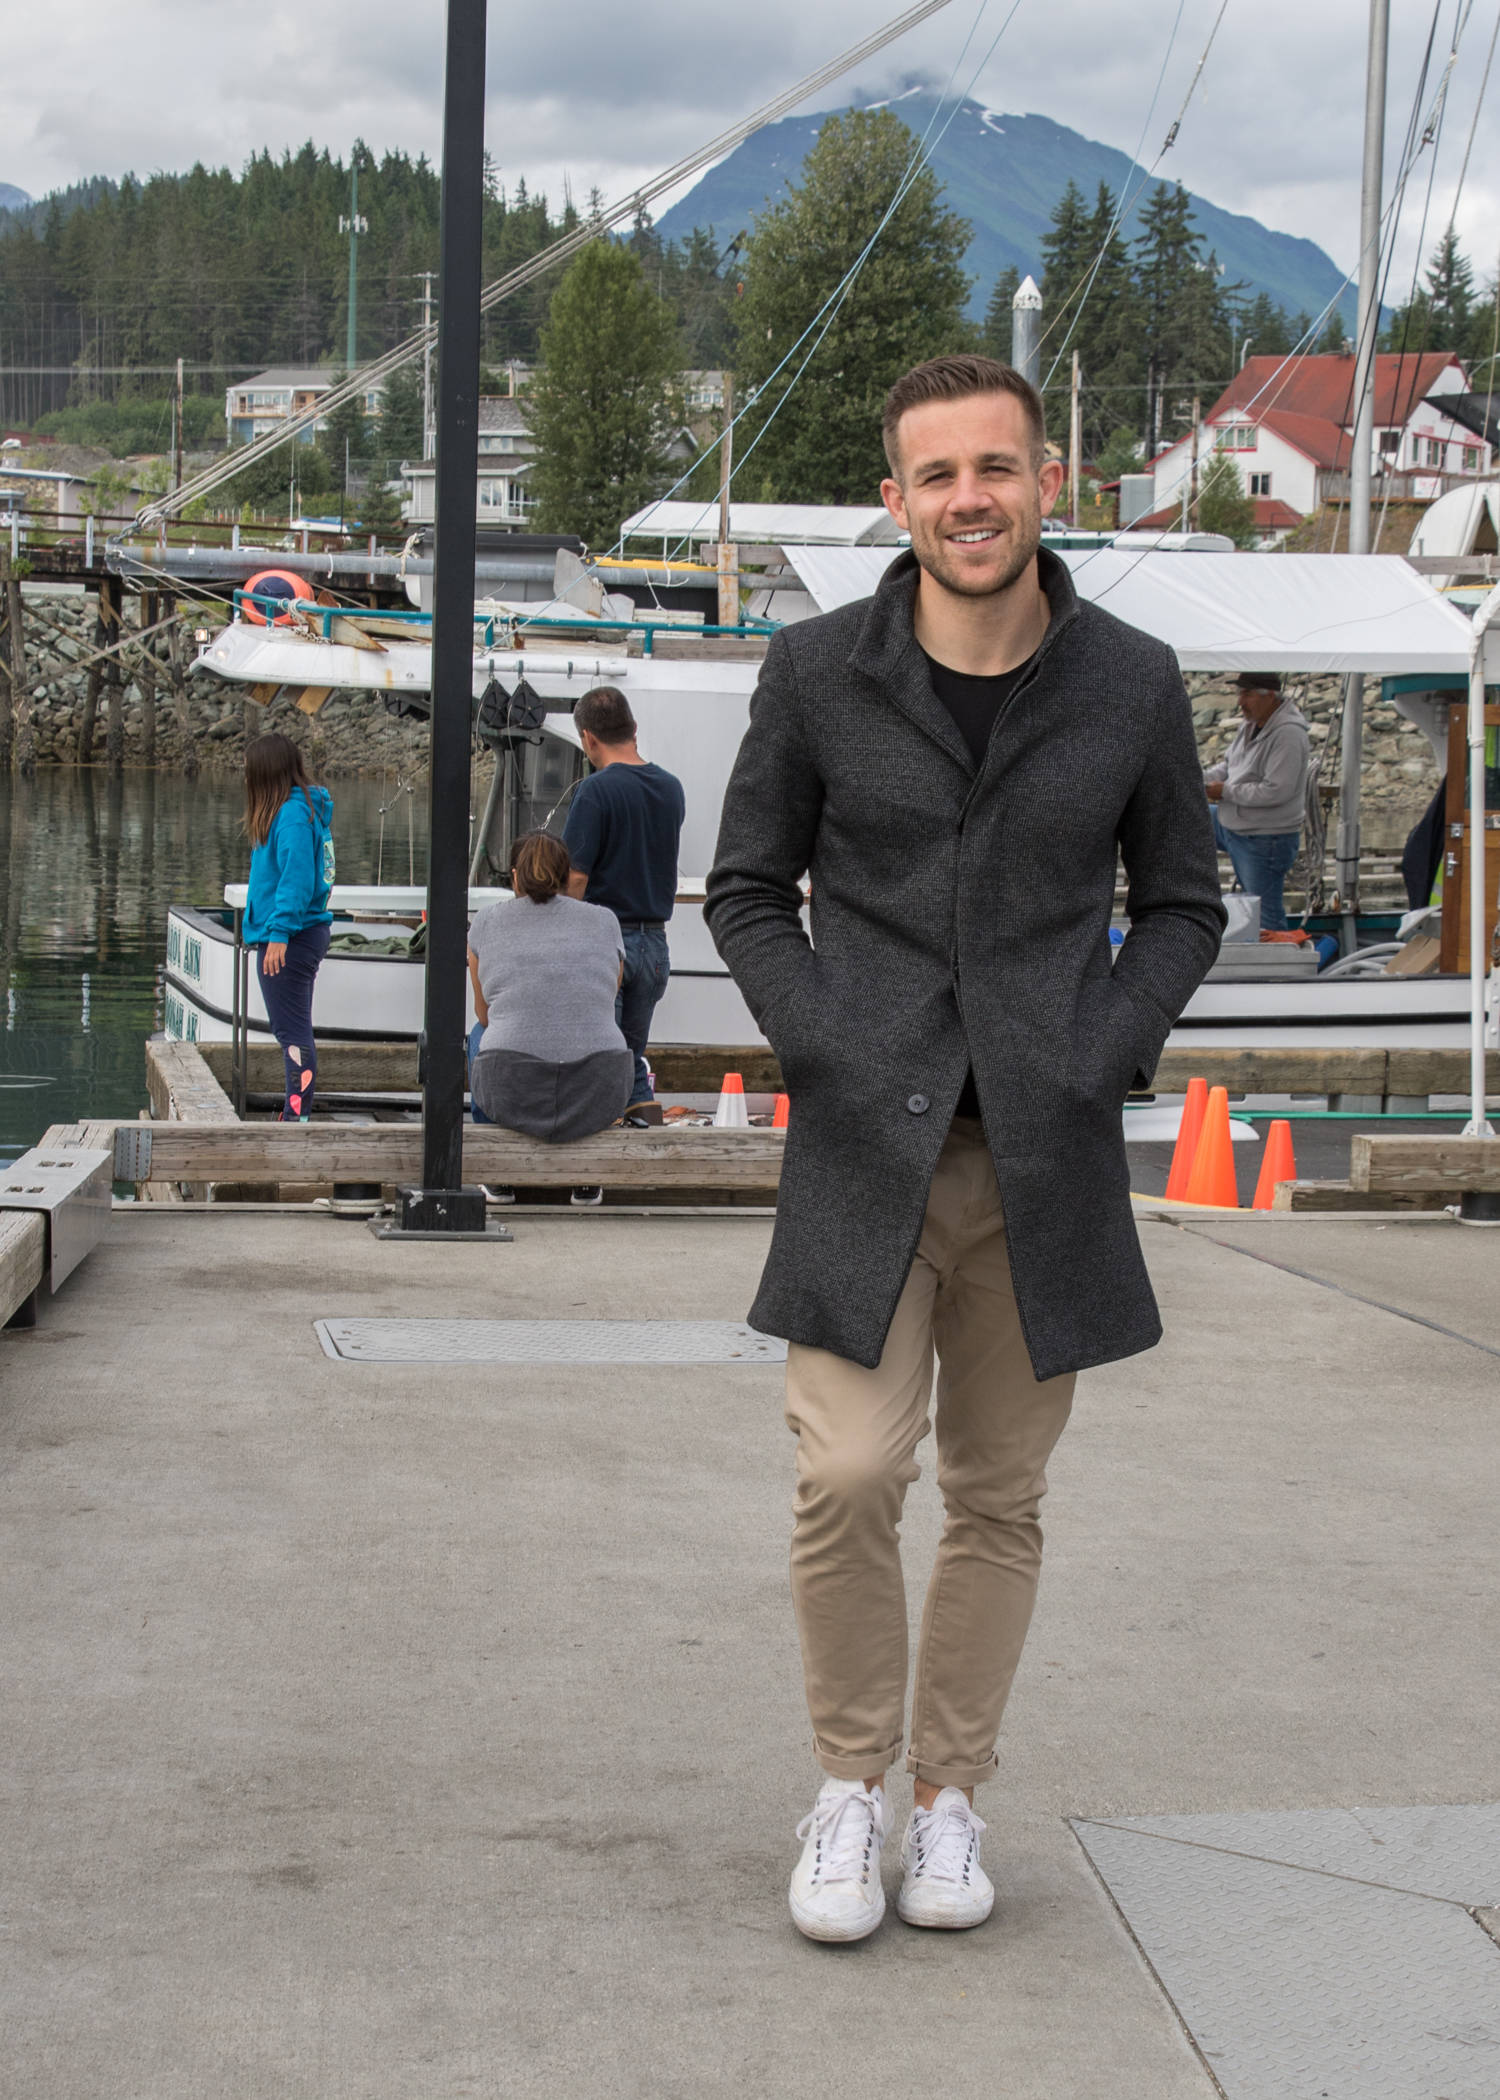 Style doesn’t have to be complicated. Matt Weighman, a visitor from the UK, keeps it simple by wearing a woven grey Zara Man jacket over a black T-shirt and slim-fit khaki jeans with rolled up cuffs.